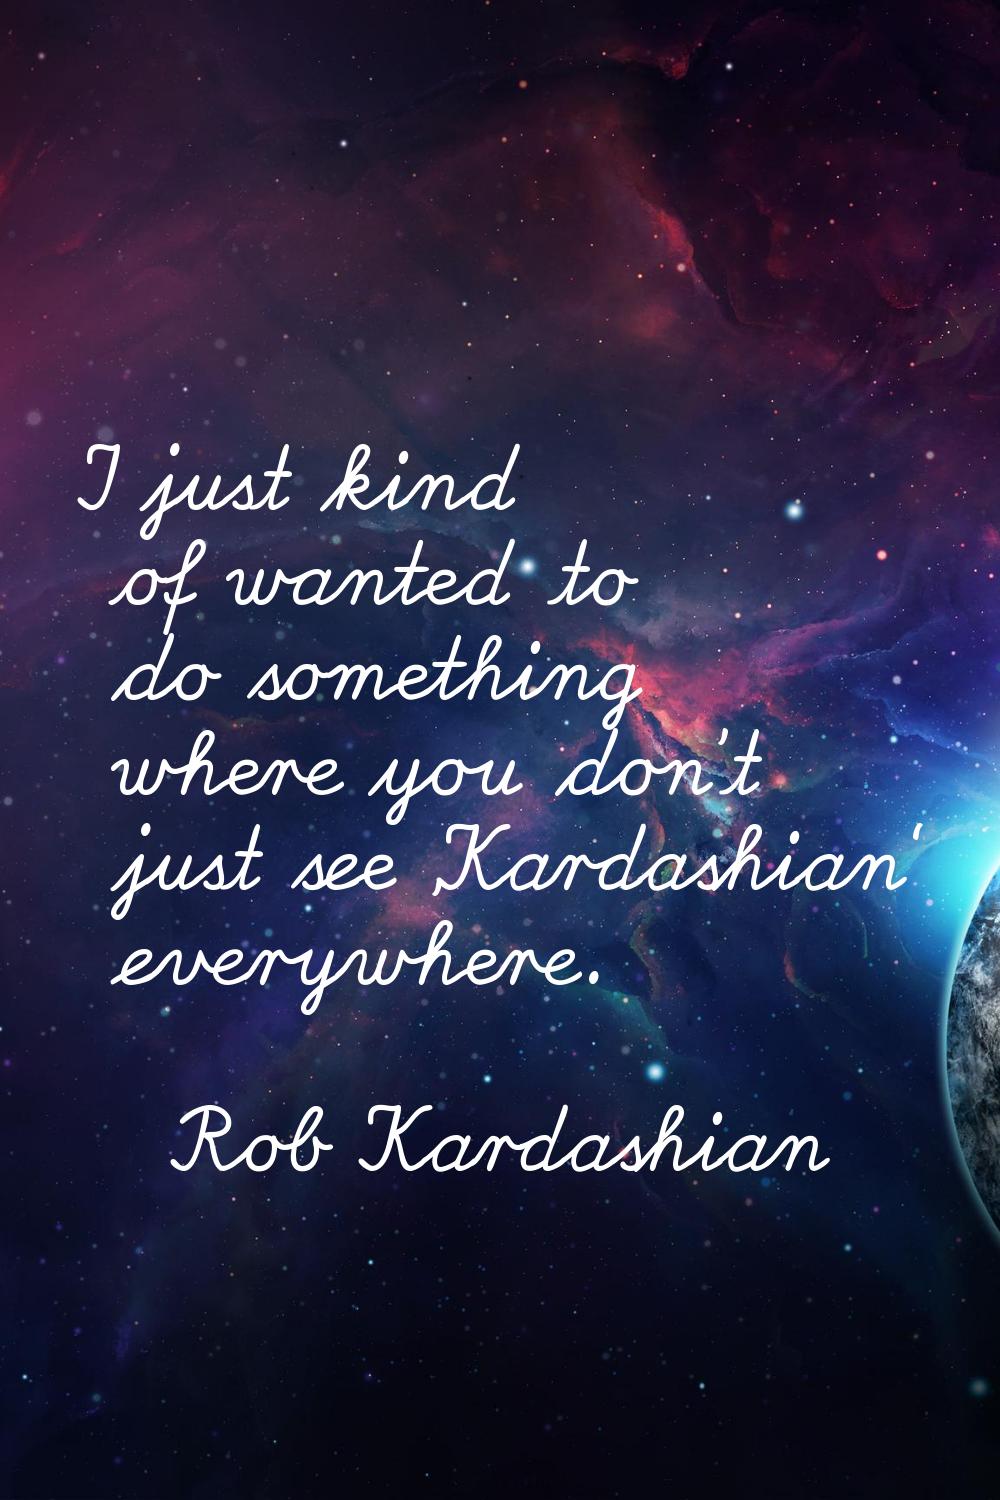 I just kind of wanted to do something where you don't just see 'Kardashian' everywhere.